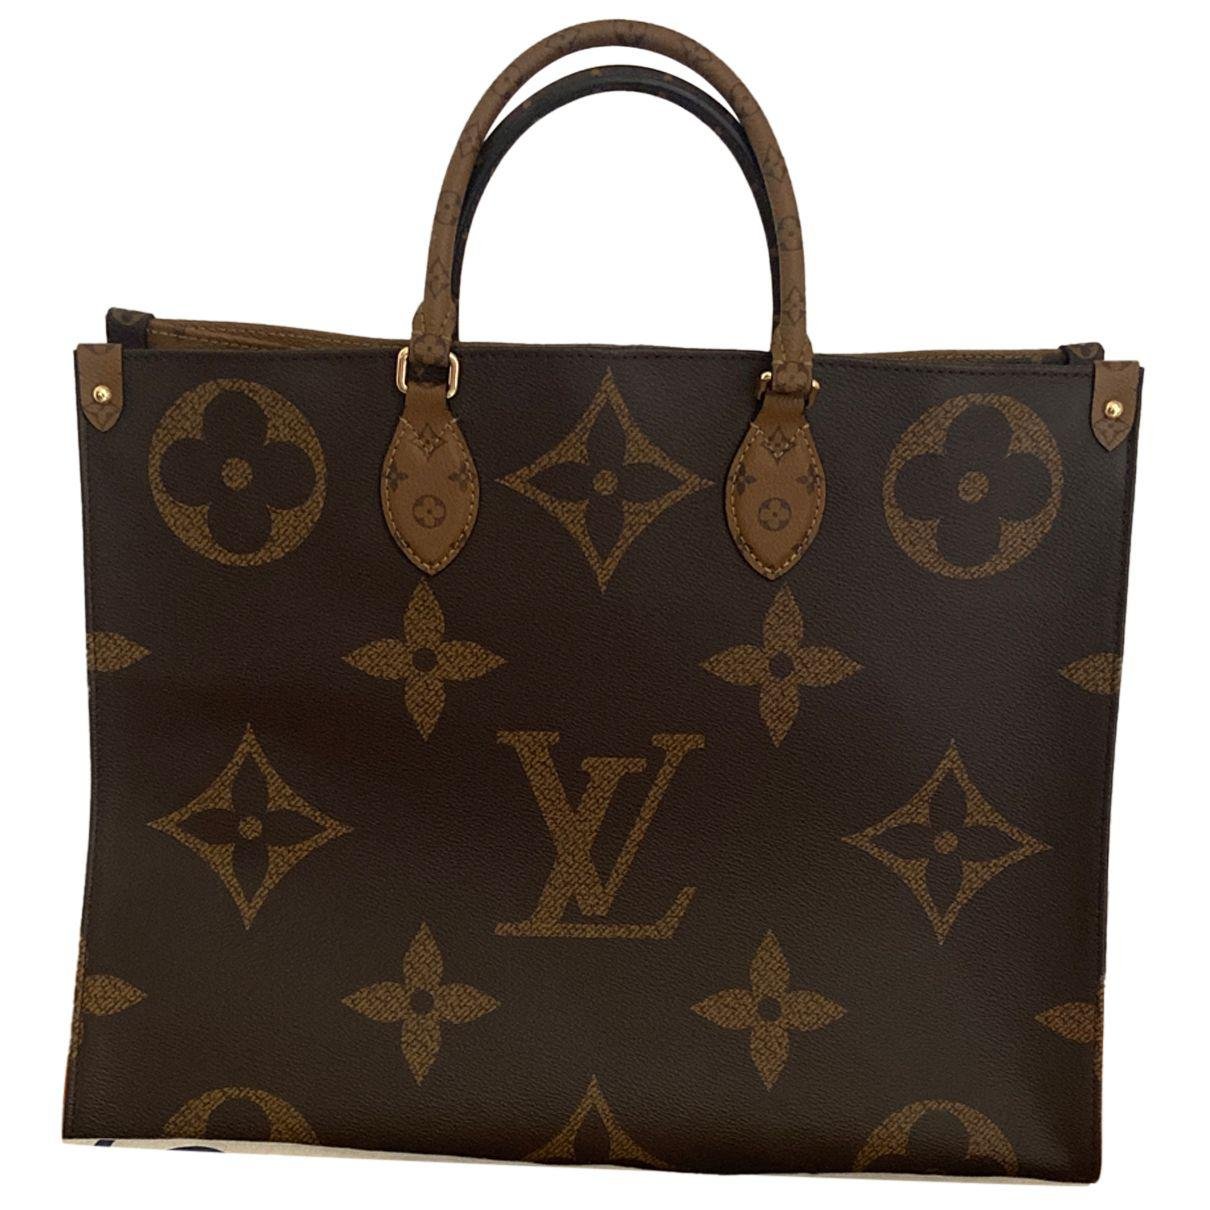 Onthego vegan leather tote (Onthego) by LOUIS VUITTON